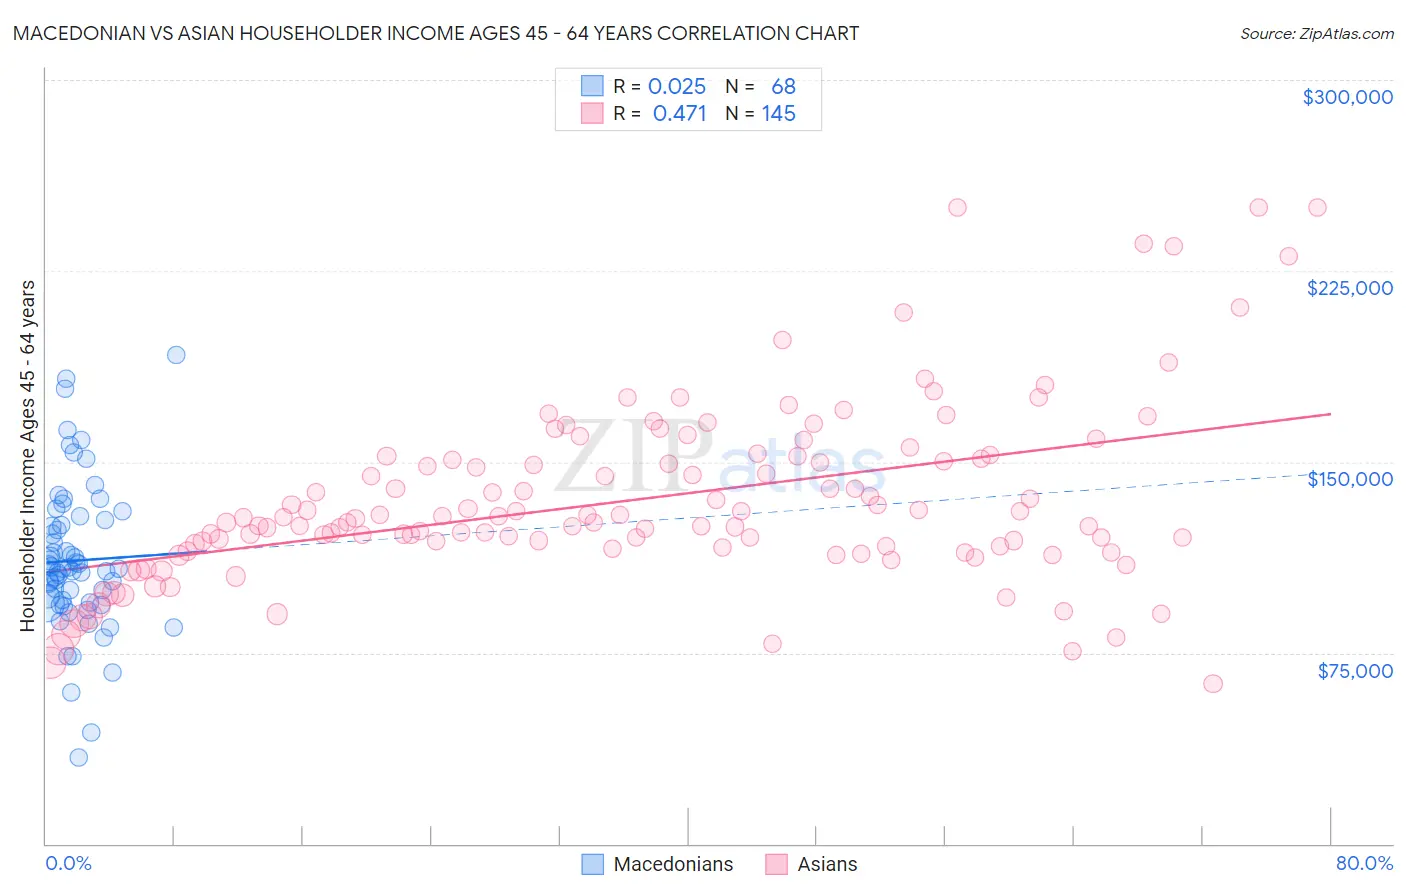 Macedonian vs Asian Householder Income Ages 45 - 64 years